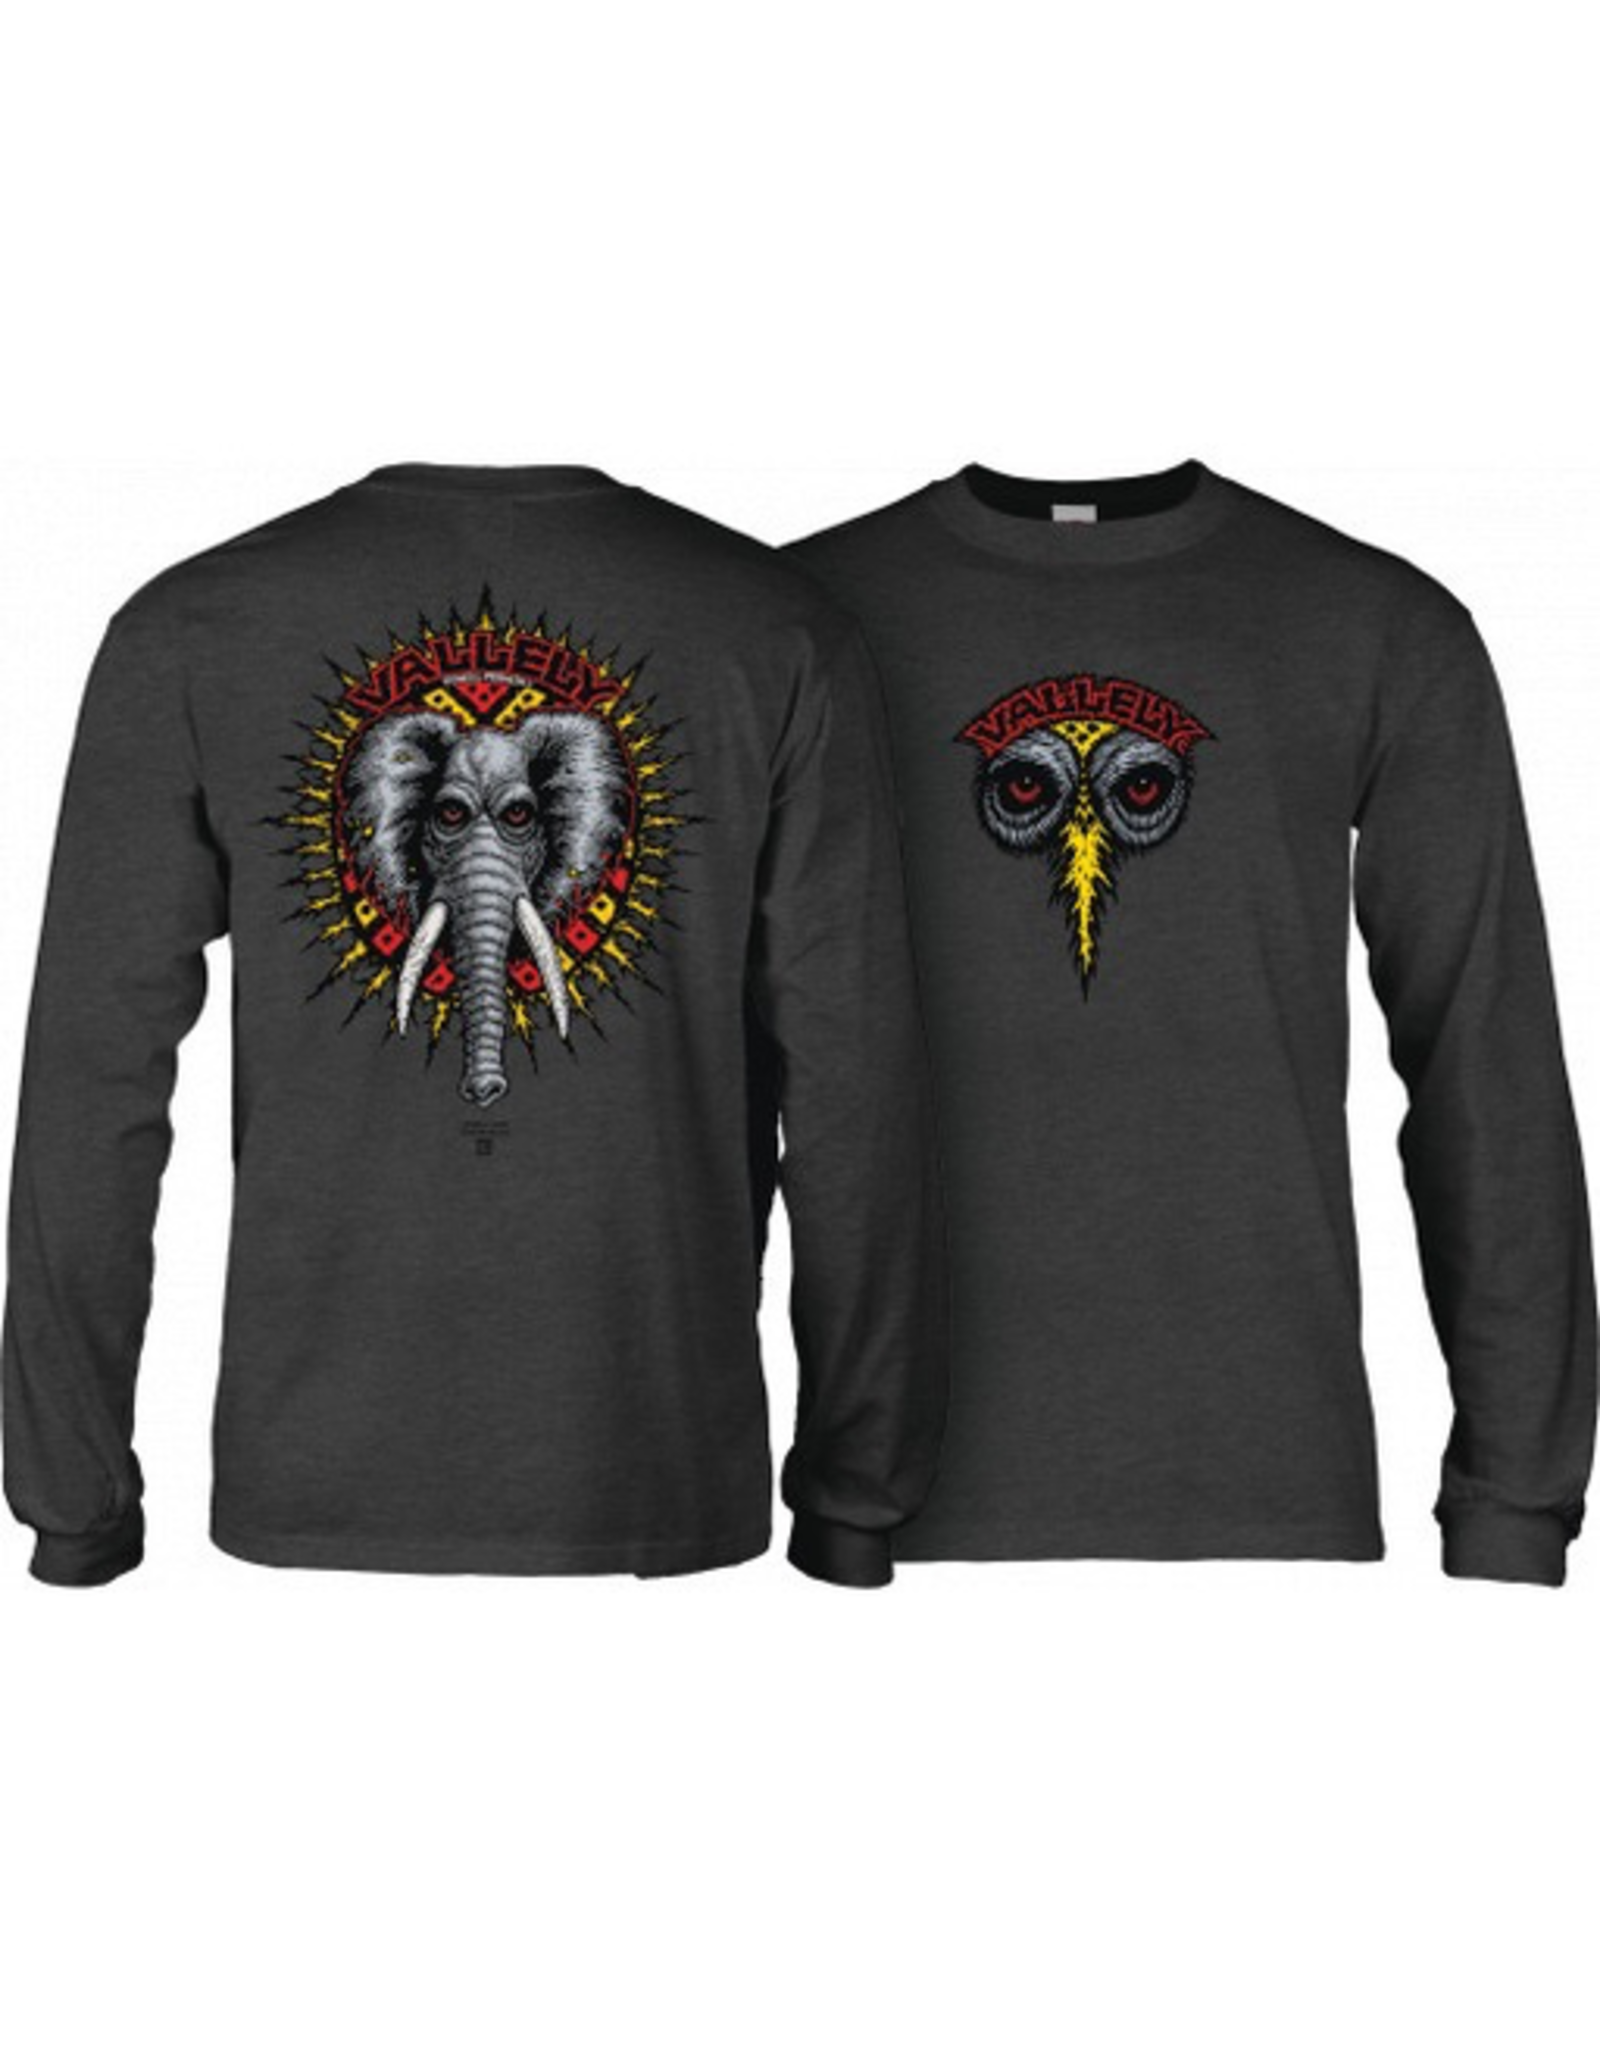 POWELL Powell Peralta Vallely Elephant L/S Shirt Charcoal